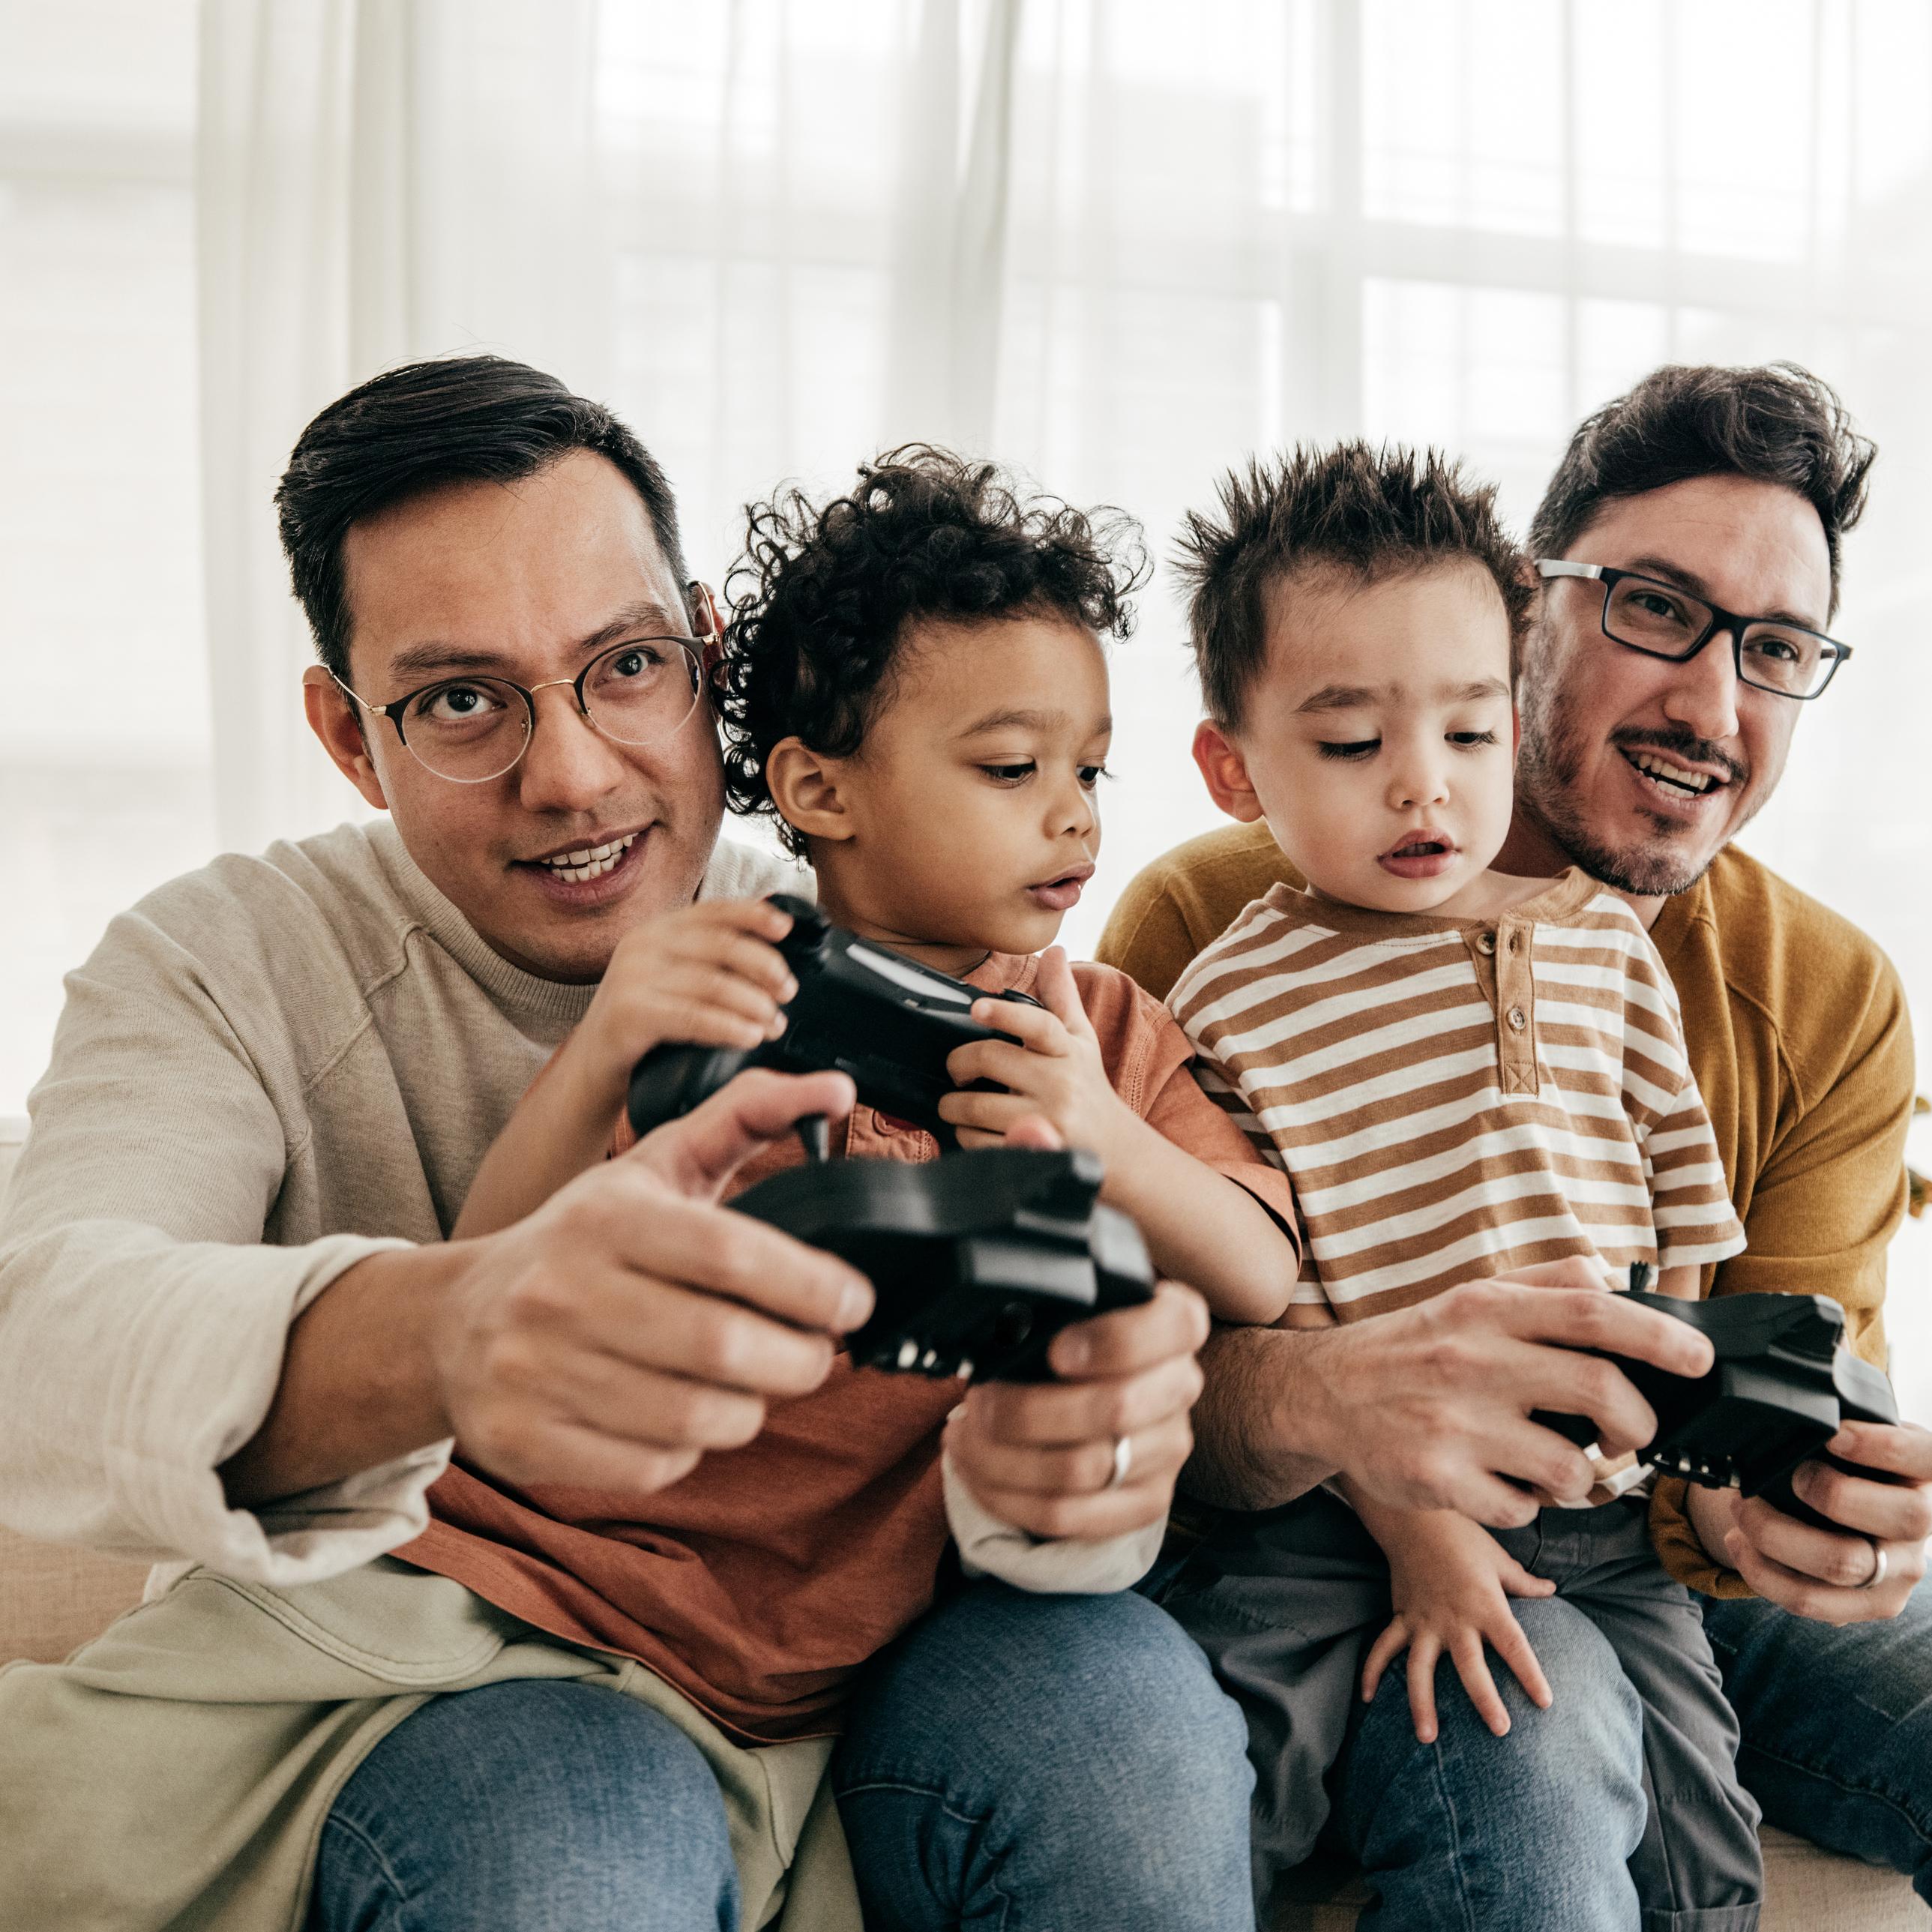 Two queer parents hold their children on their laps teaching them how to play video games.